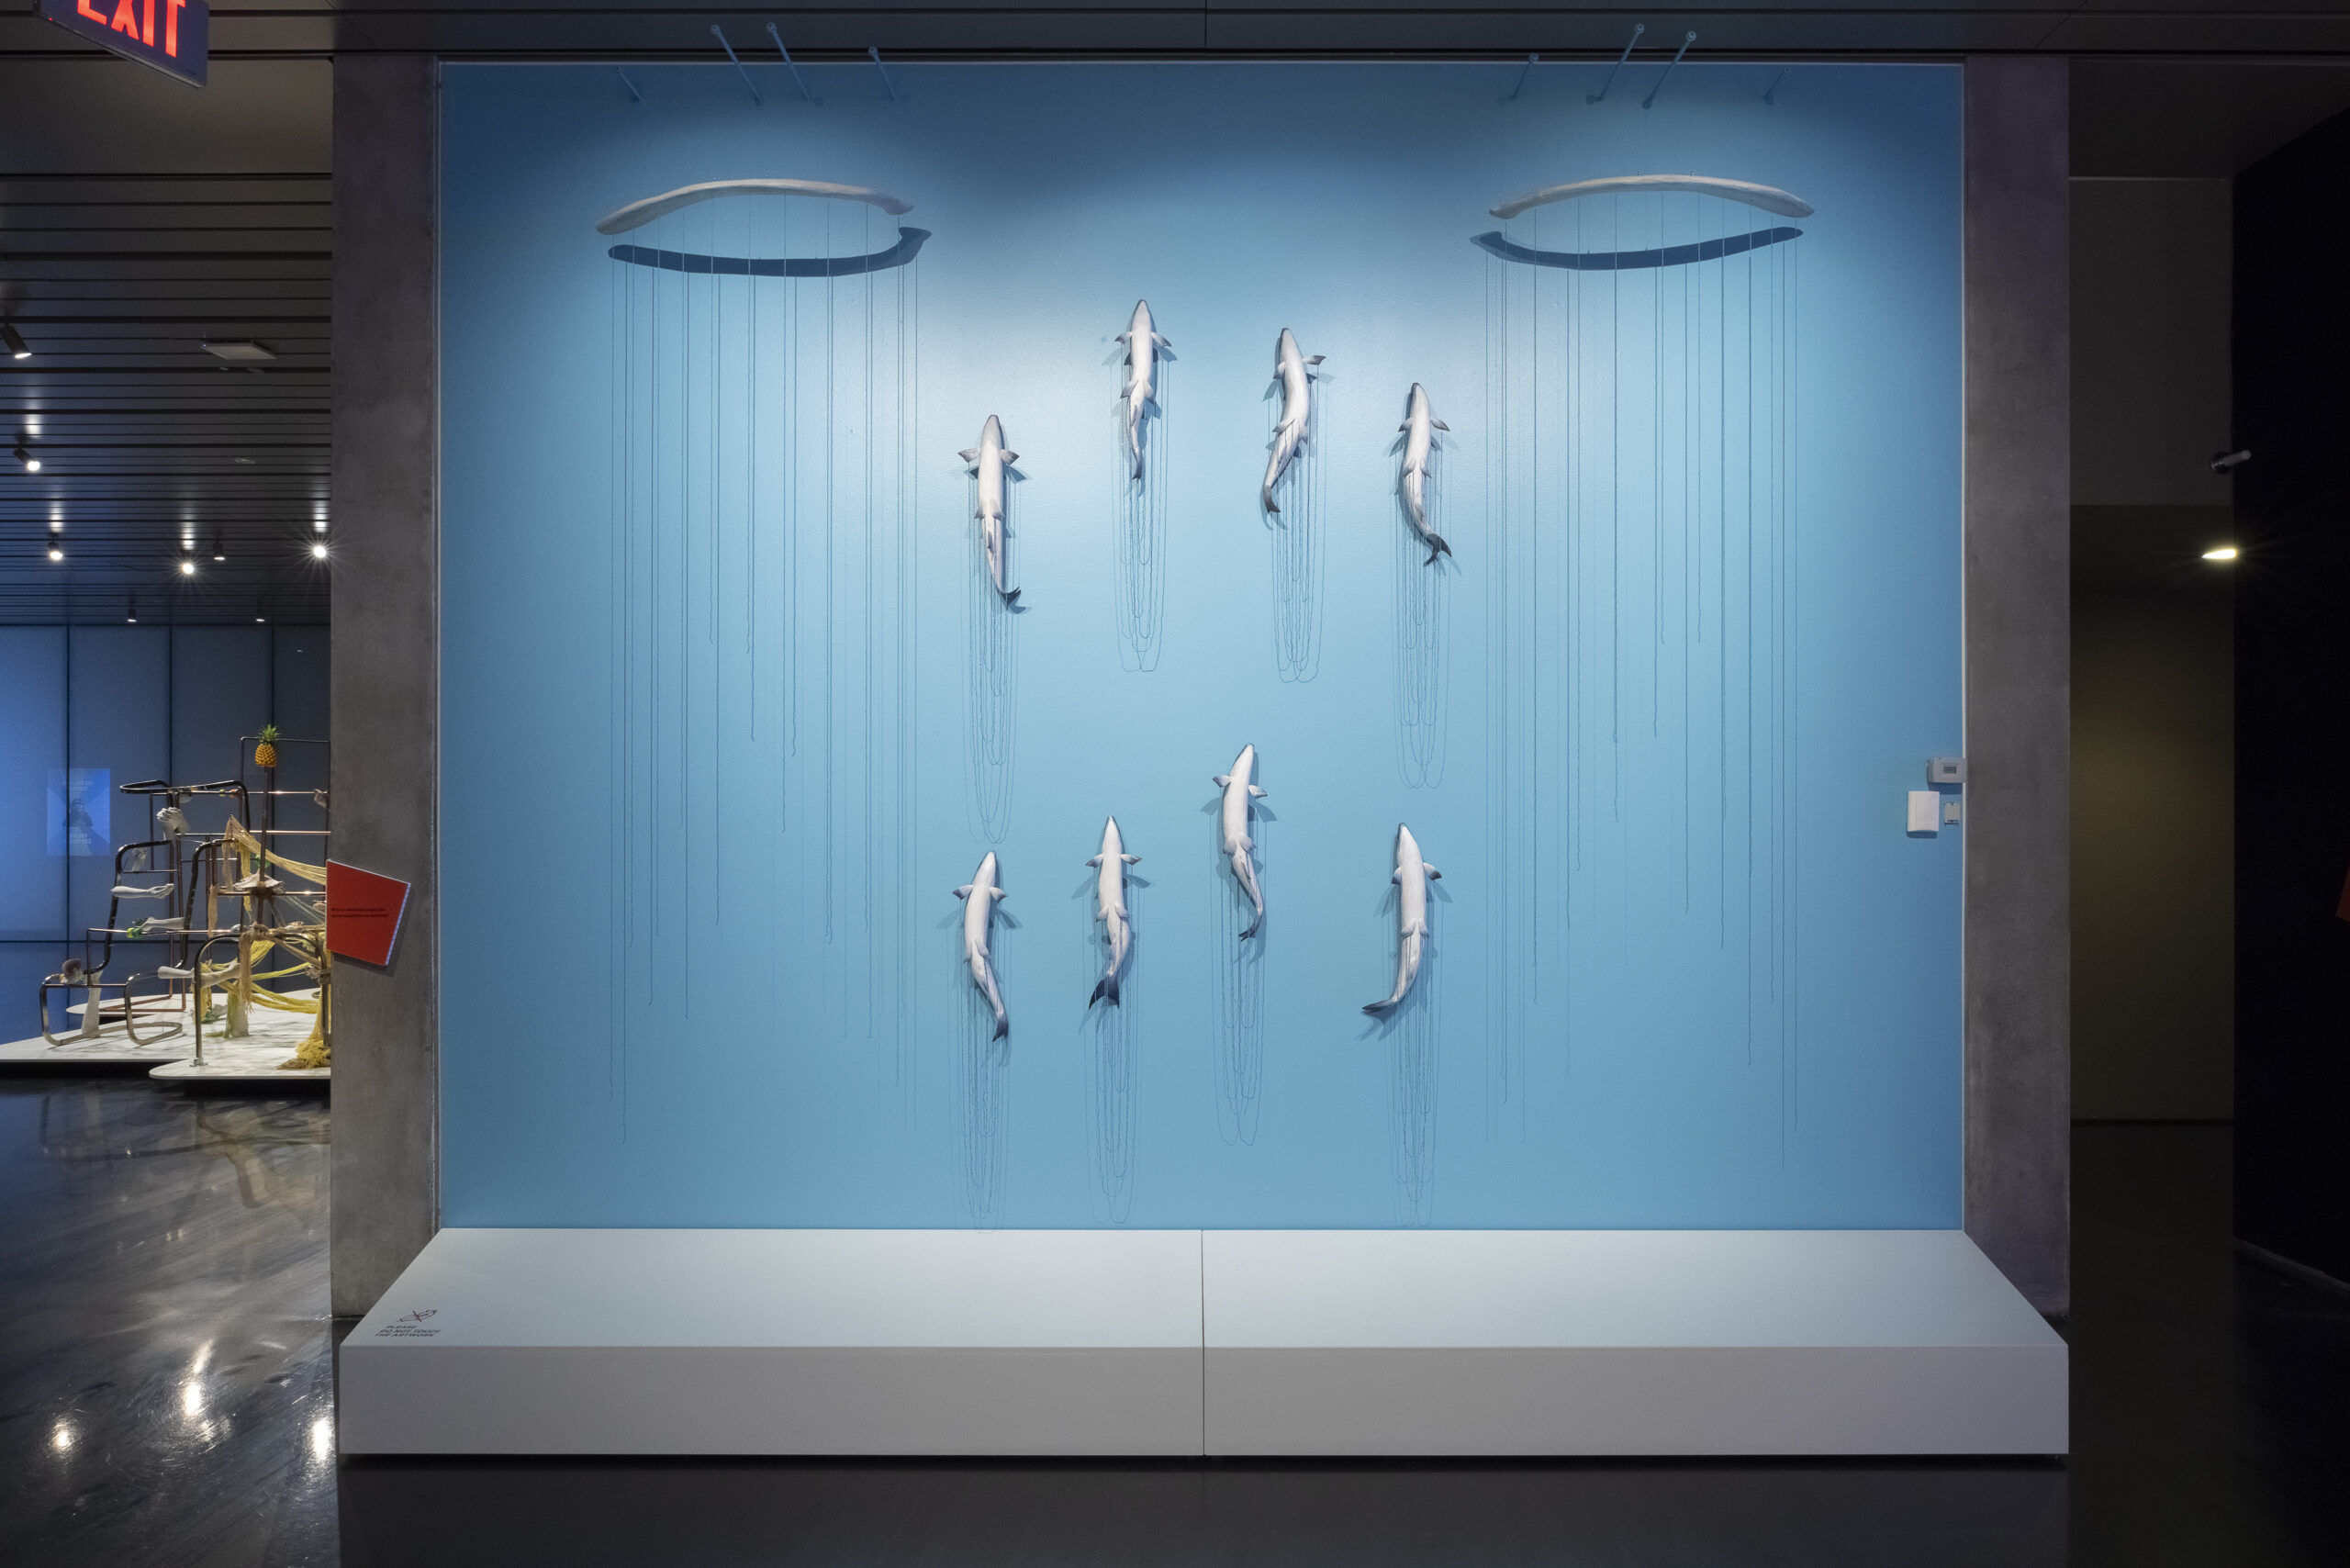 Eight carved basswood salmon are arranged to look like they are swimming up a blue wall. Blue beaded strands hang on either side of the fish.